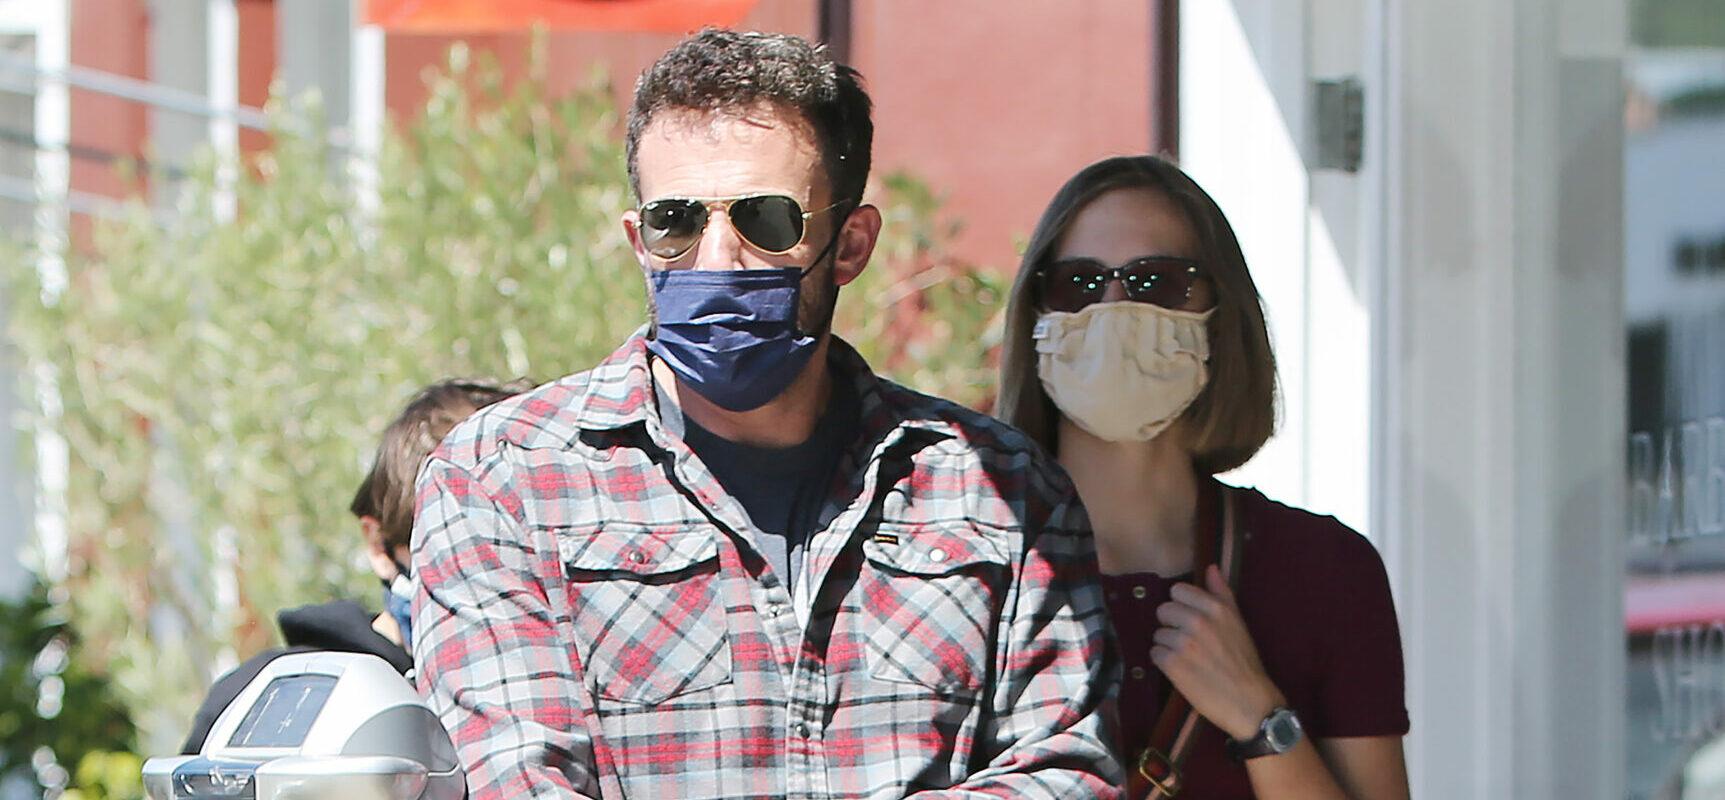 Ben Affleck takes his kids for Ice Cream in Brentwood